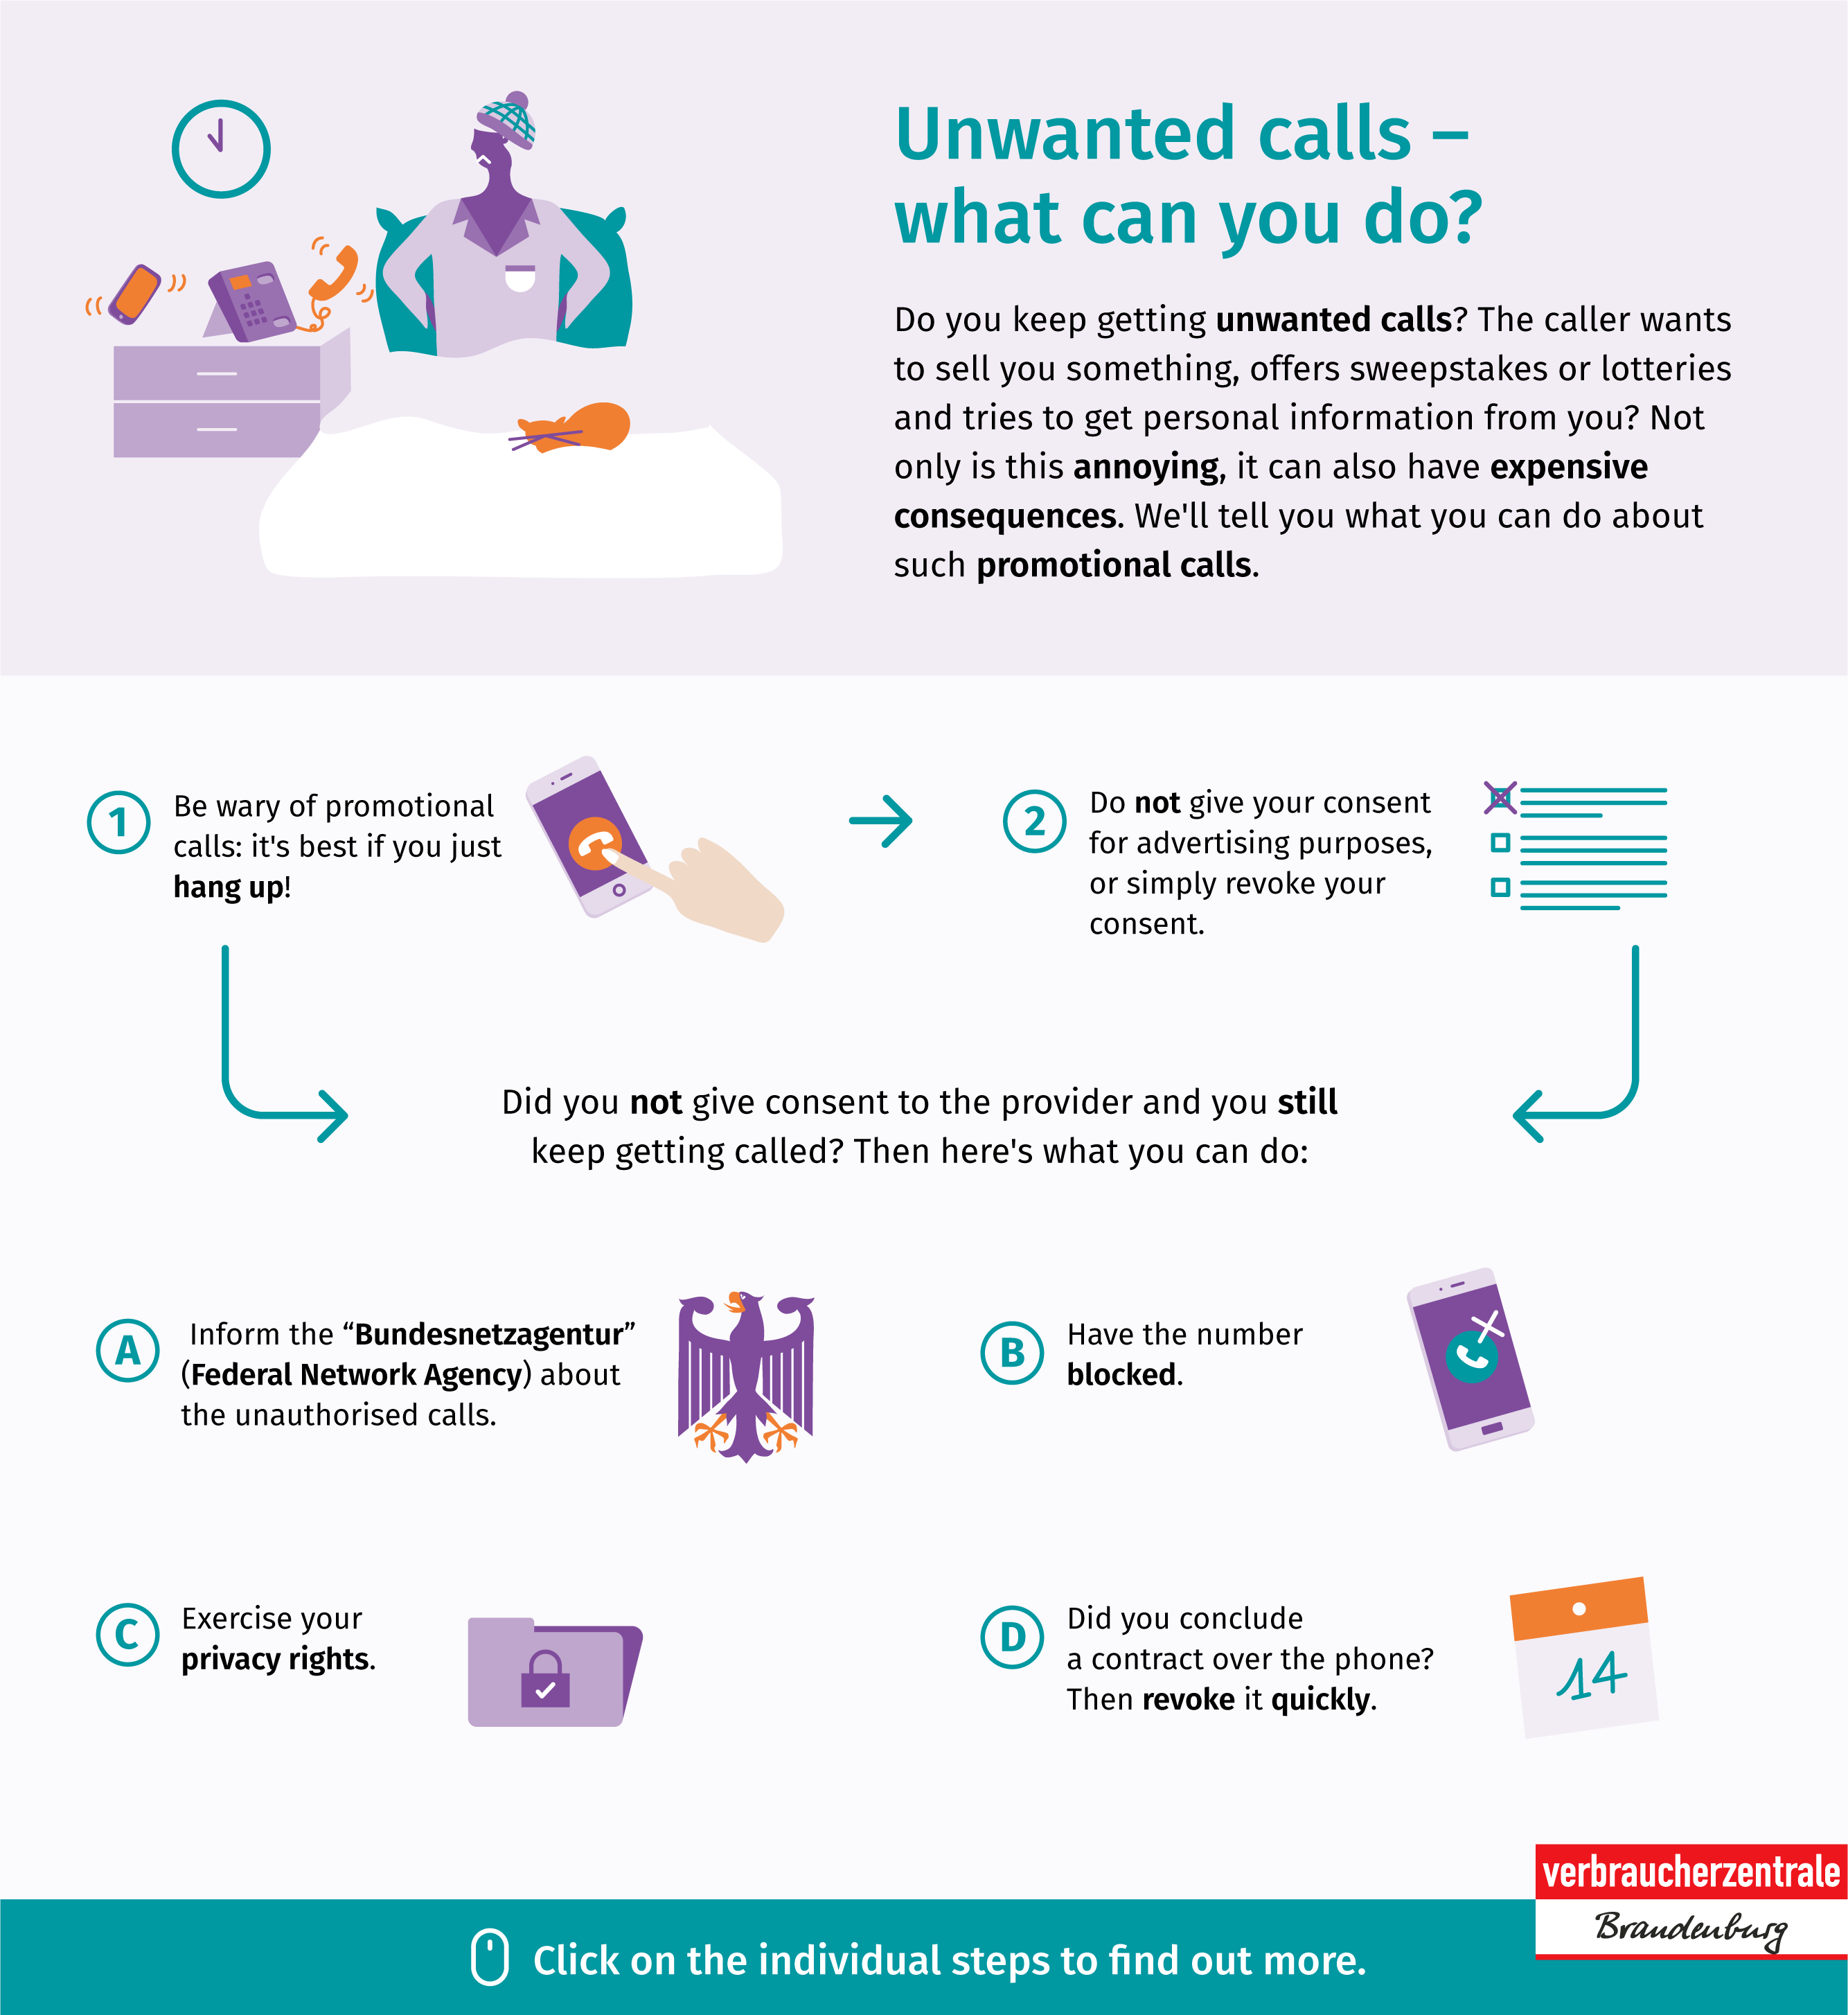 We’ll show you what you can do about unwanted calls with our interactive infographic.